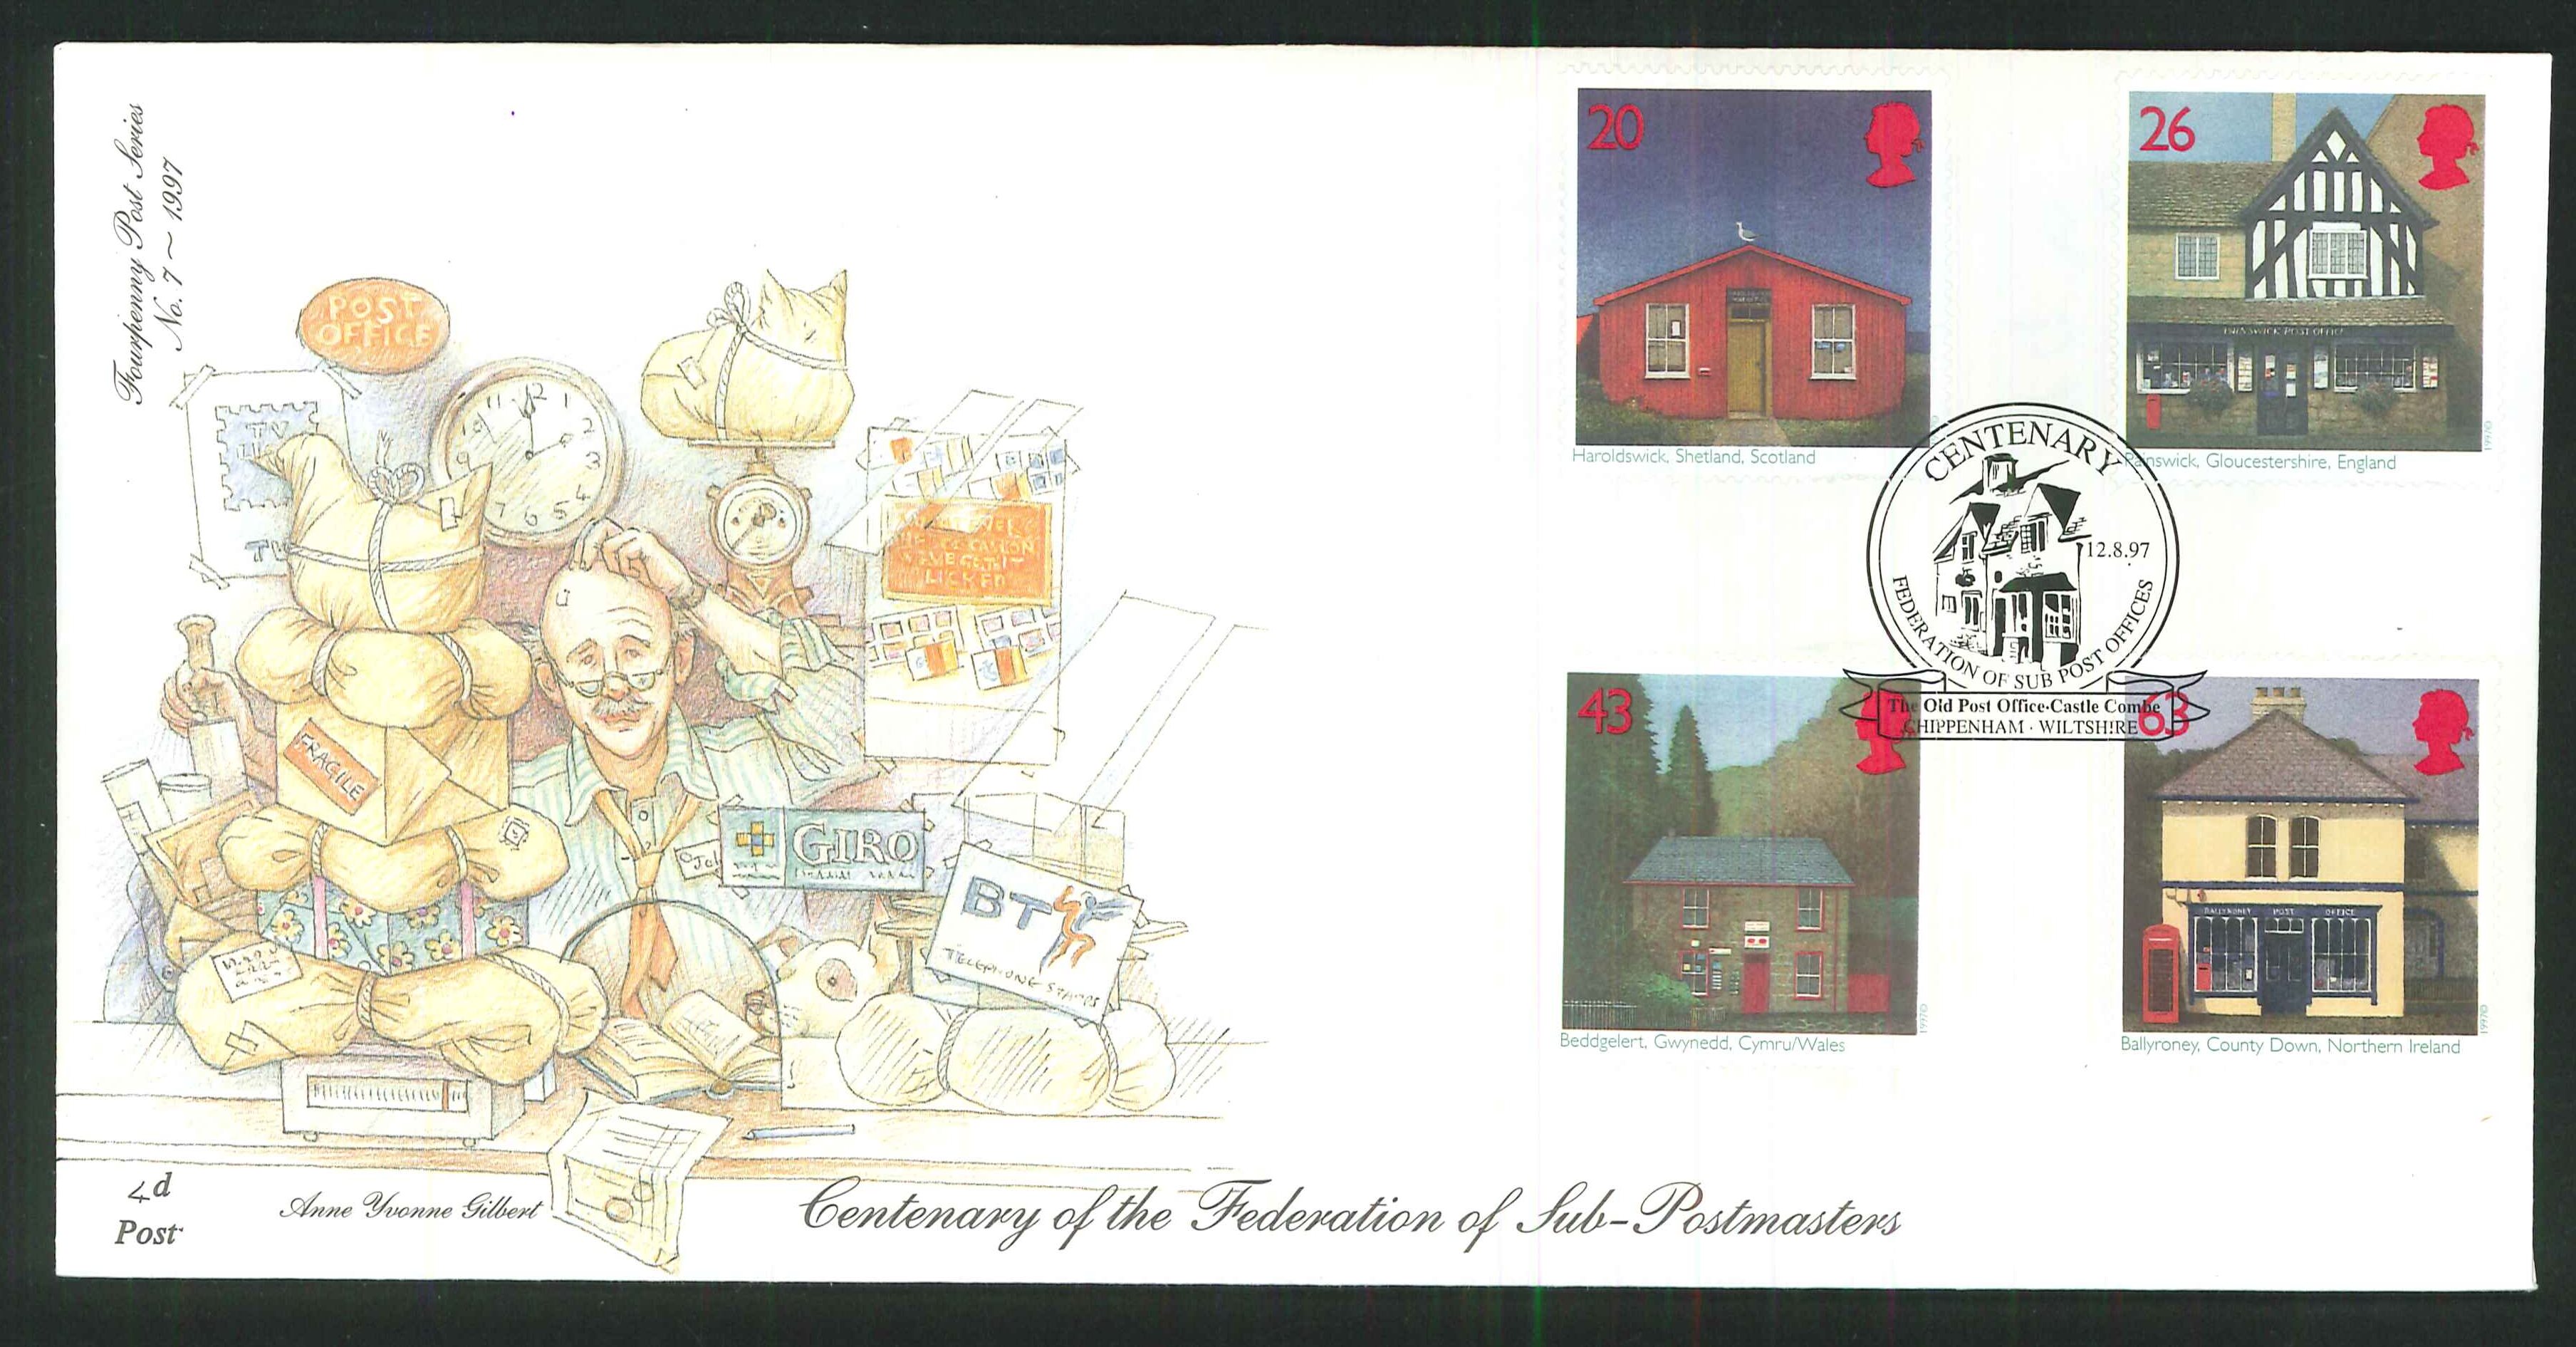 1997 - Centenary of the Federation of Sub Postmasters, Old Post Office, Castle Coombe Postmark